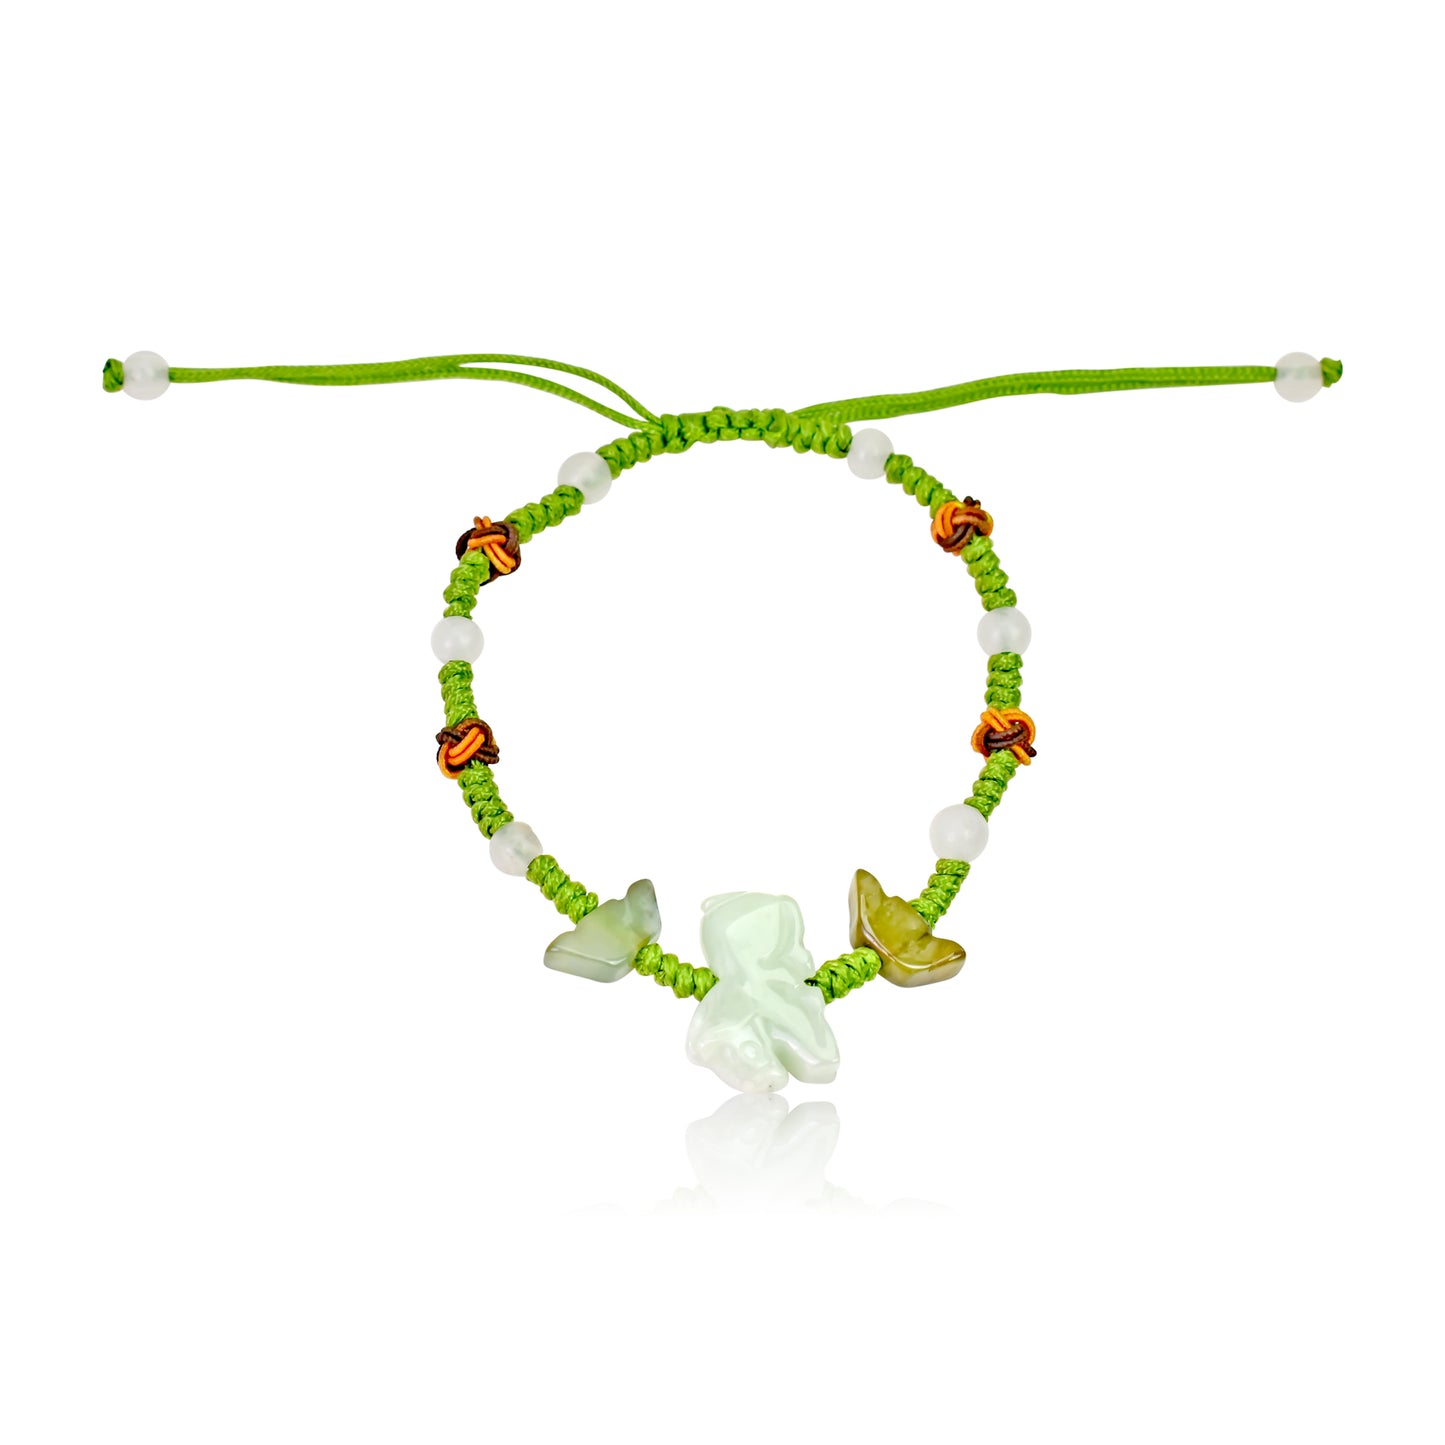 A Unique Gift: Horse Chinese Zodiac Handmade Jade Bracelet made with Lime Cord